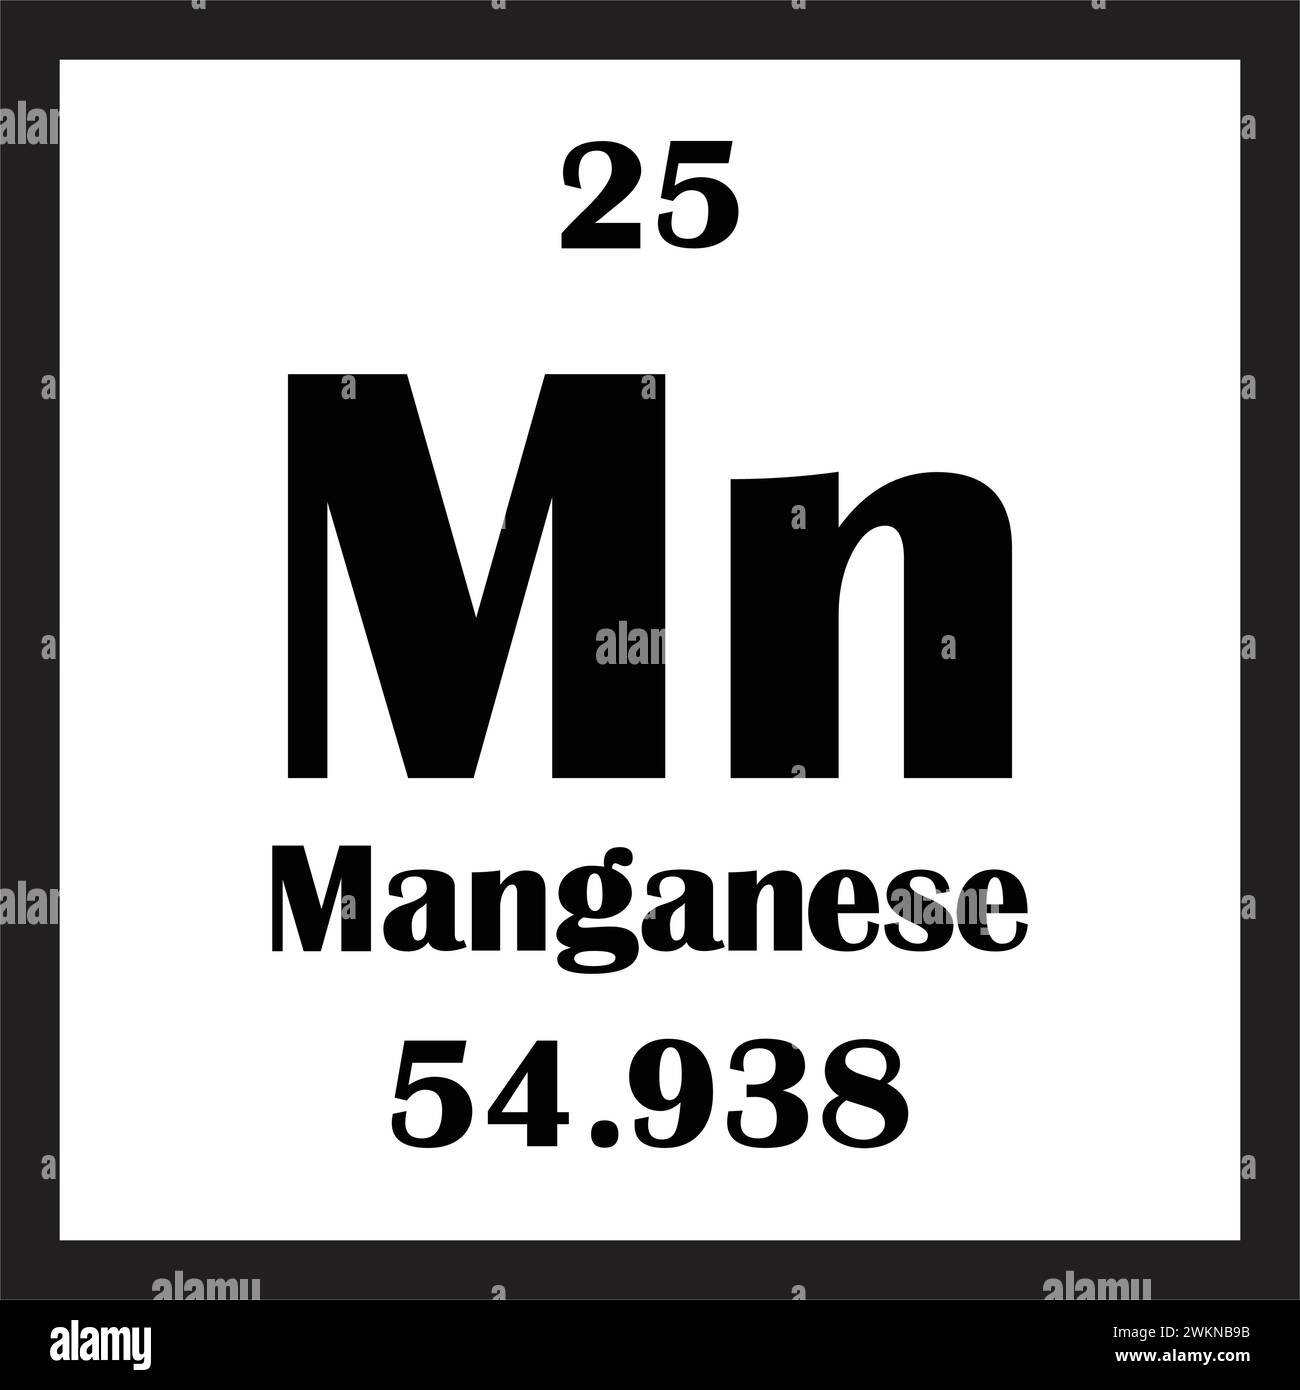 Manganese chemical element icon vector illustration design Stock Vector